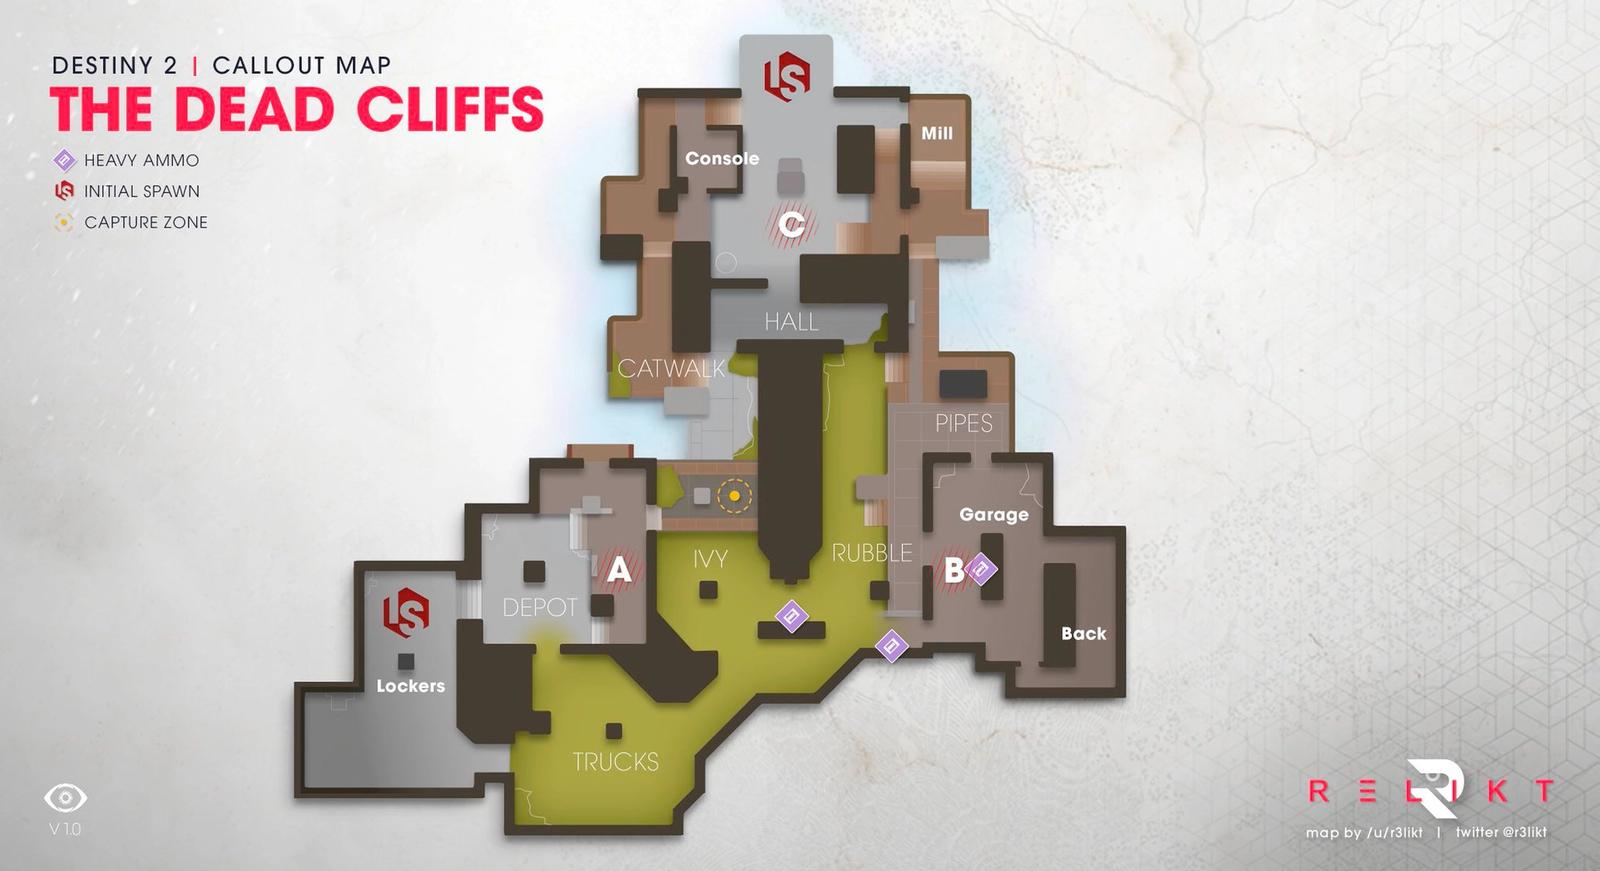 Callout map for Destiny 2 Dead Cliffs map, created by the artist Relikt.